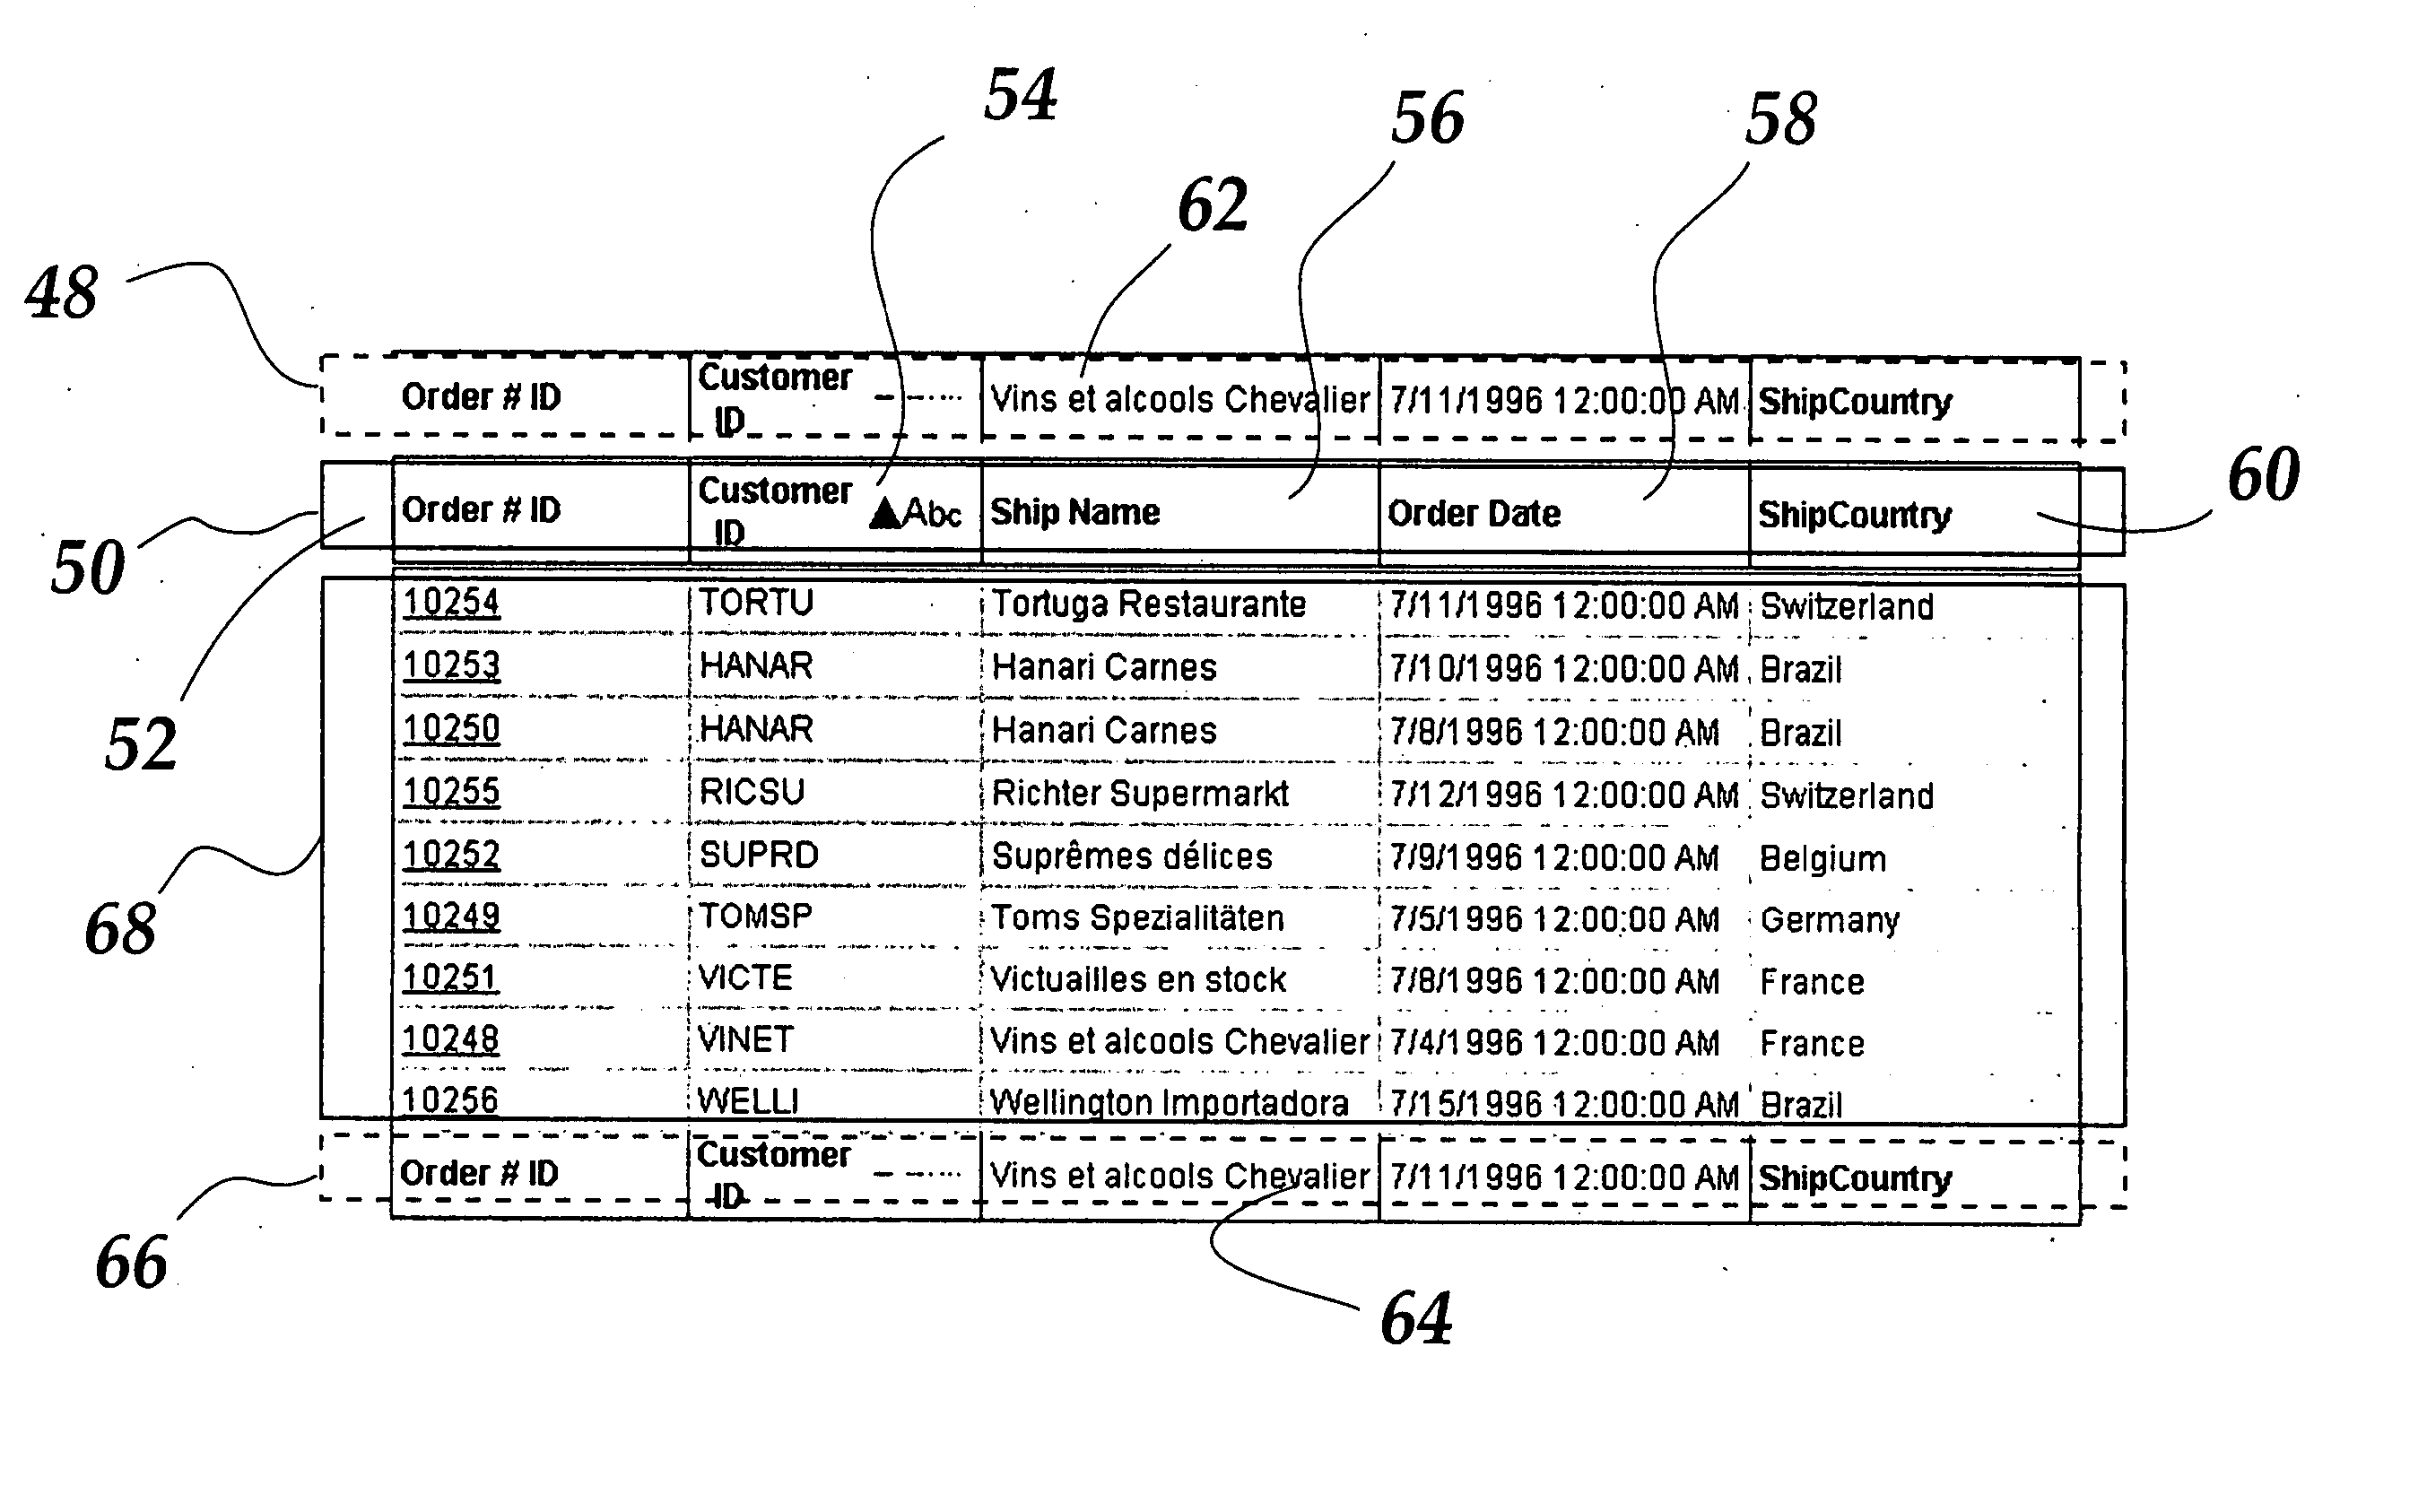 Method of displaying data in a table